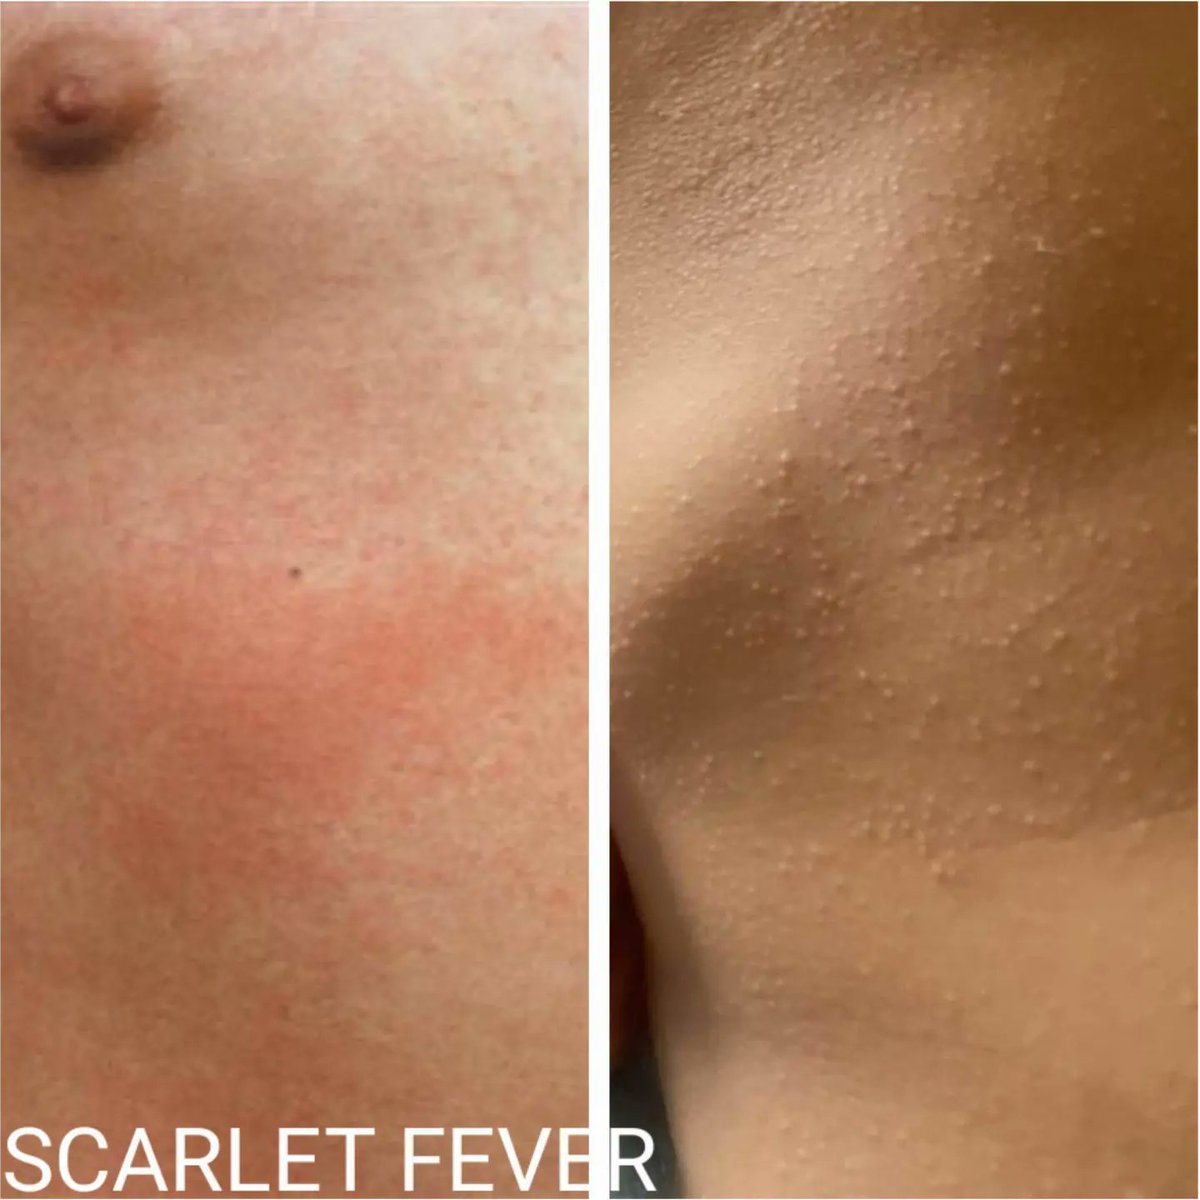 The scarlet fever rash is historically described as bright red, but on people of color this can clearly be inaccurate; the rash may simply be flesh colored along with the characteristic sandpapery feel and appearance. #Pediatrics #MedTwitter #ScarletFever